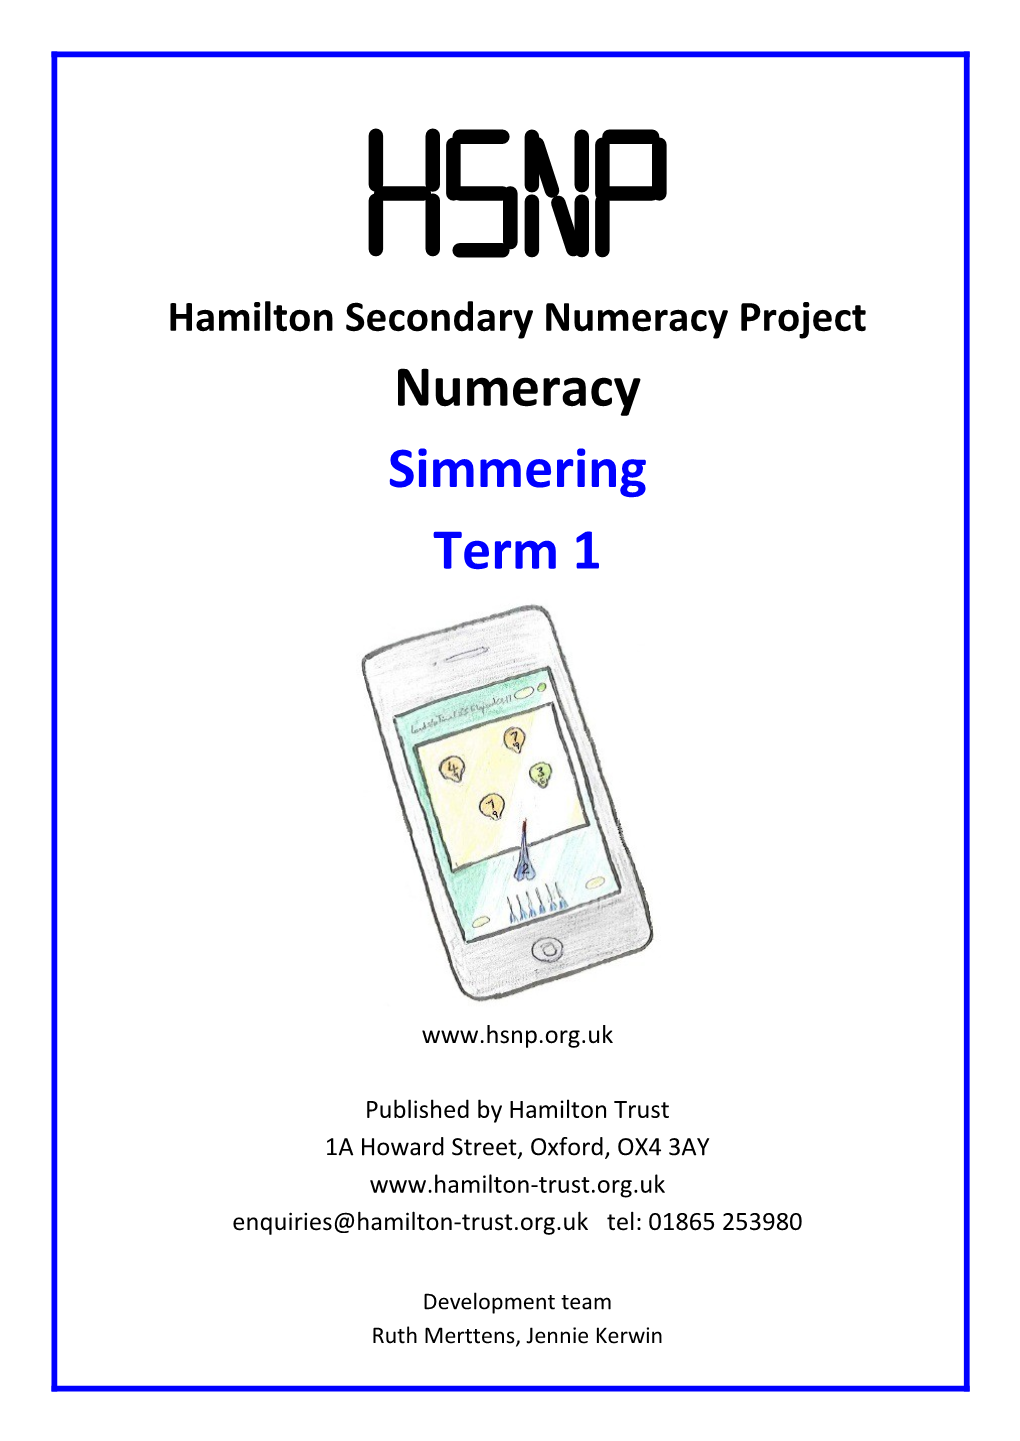 Structure of HSNP Numeracy - Four Levels of Proficiency s1